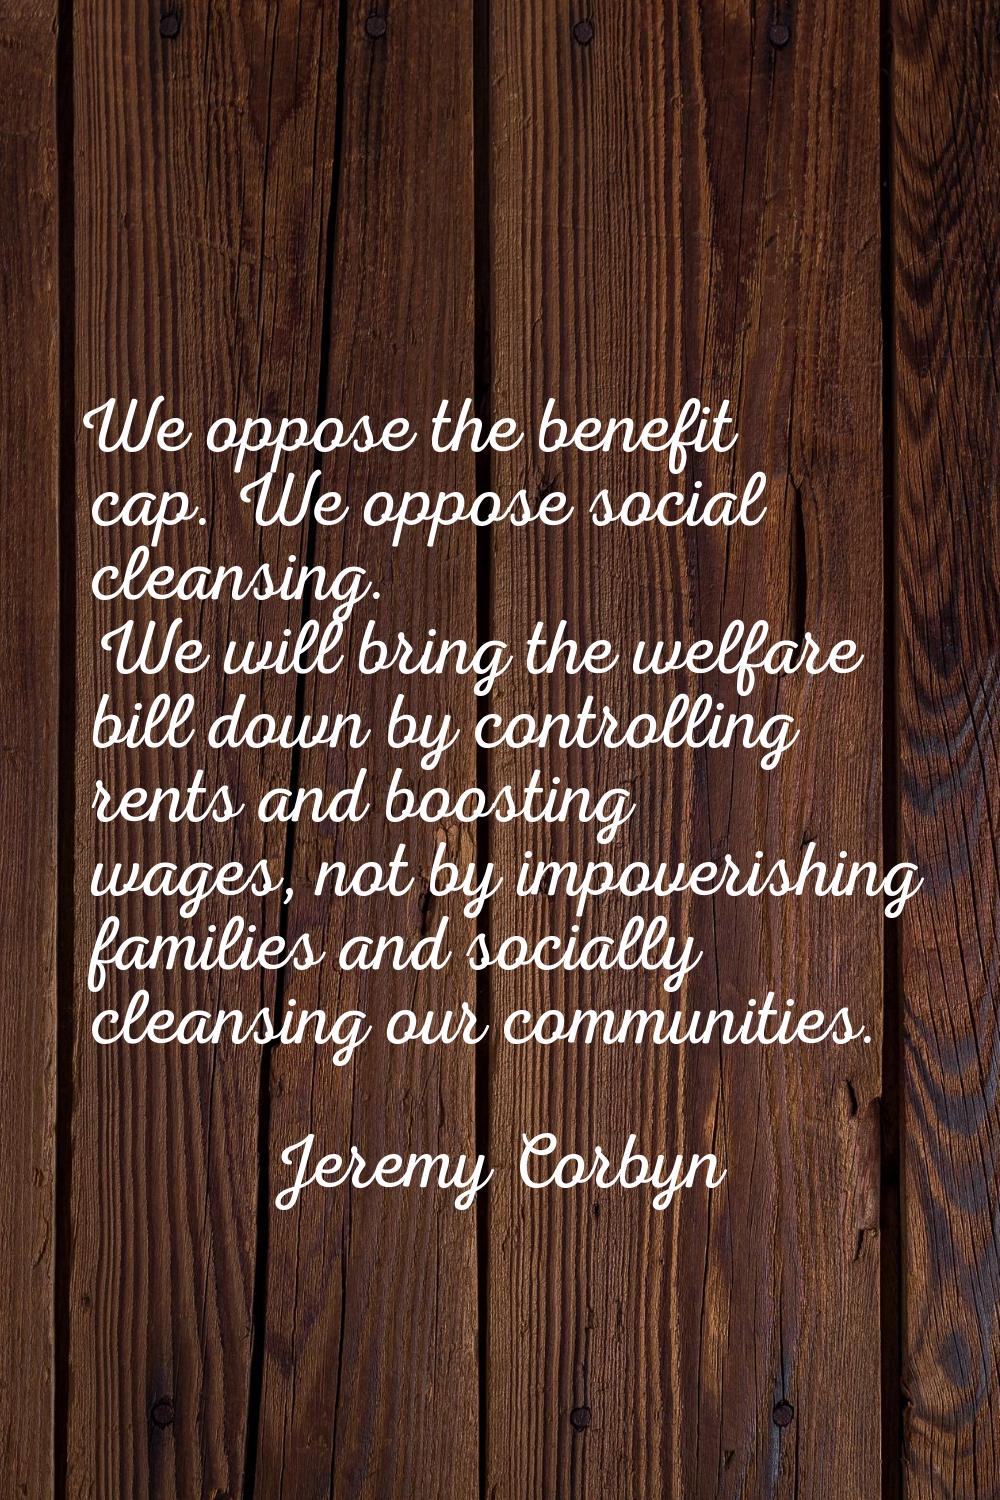 We oppose the benefit cap. We oppose social cleansing. We will bring the welfare bill down by contr